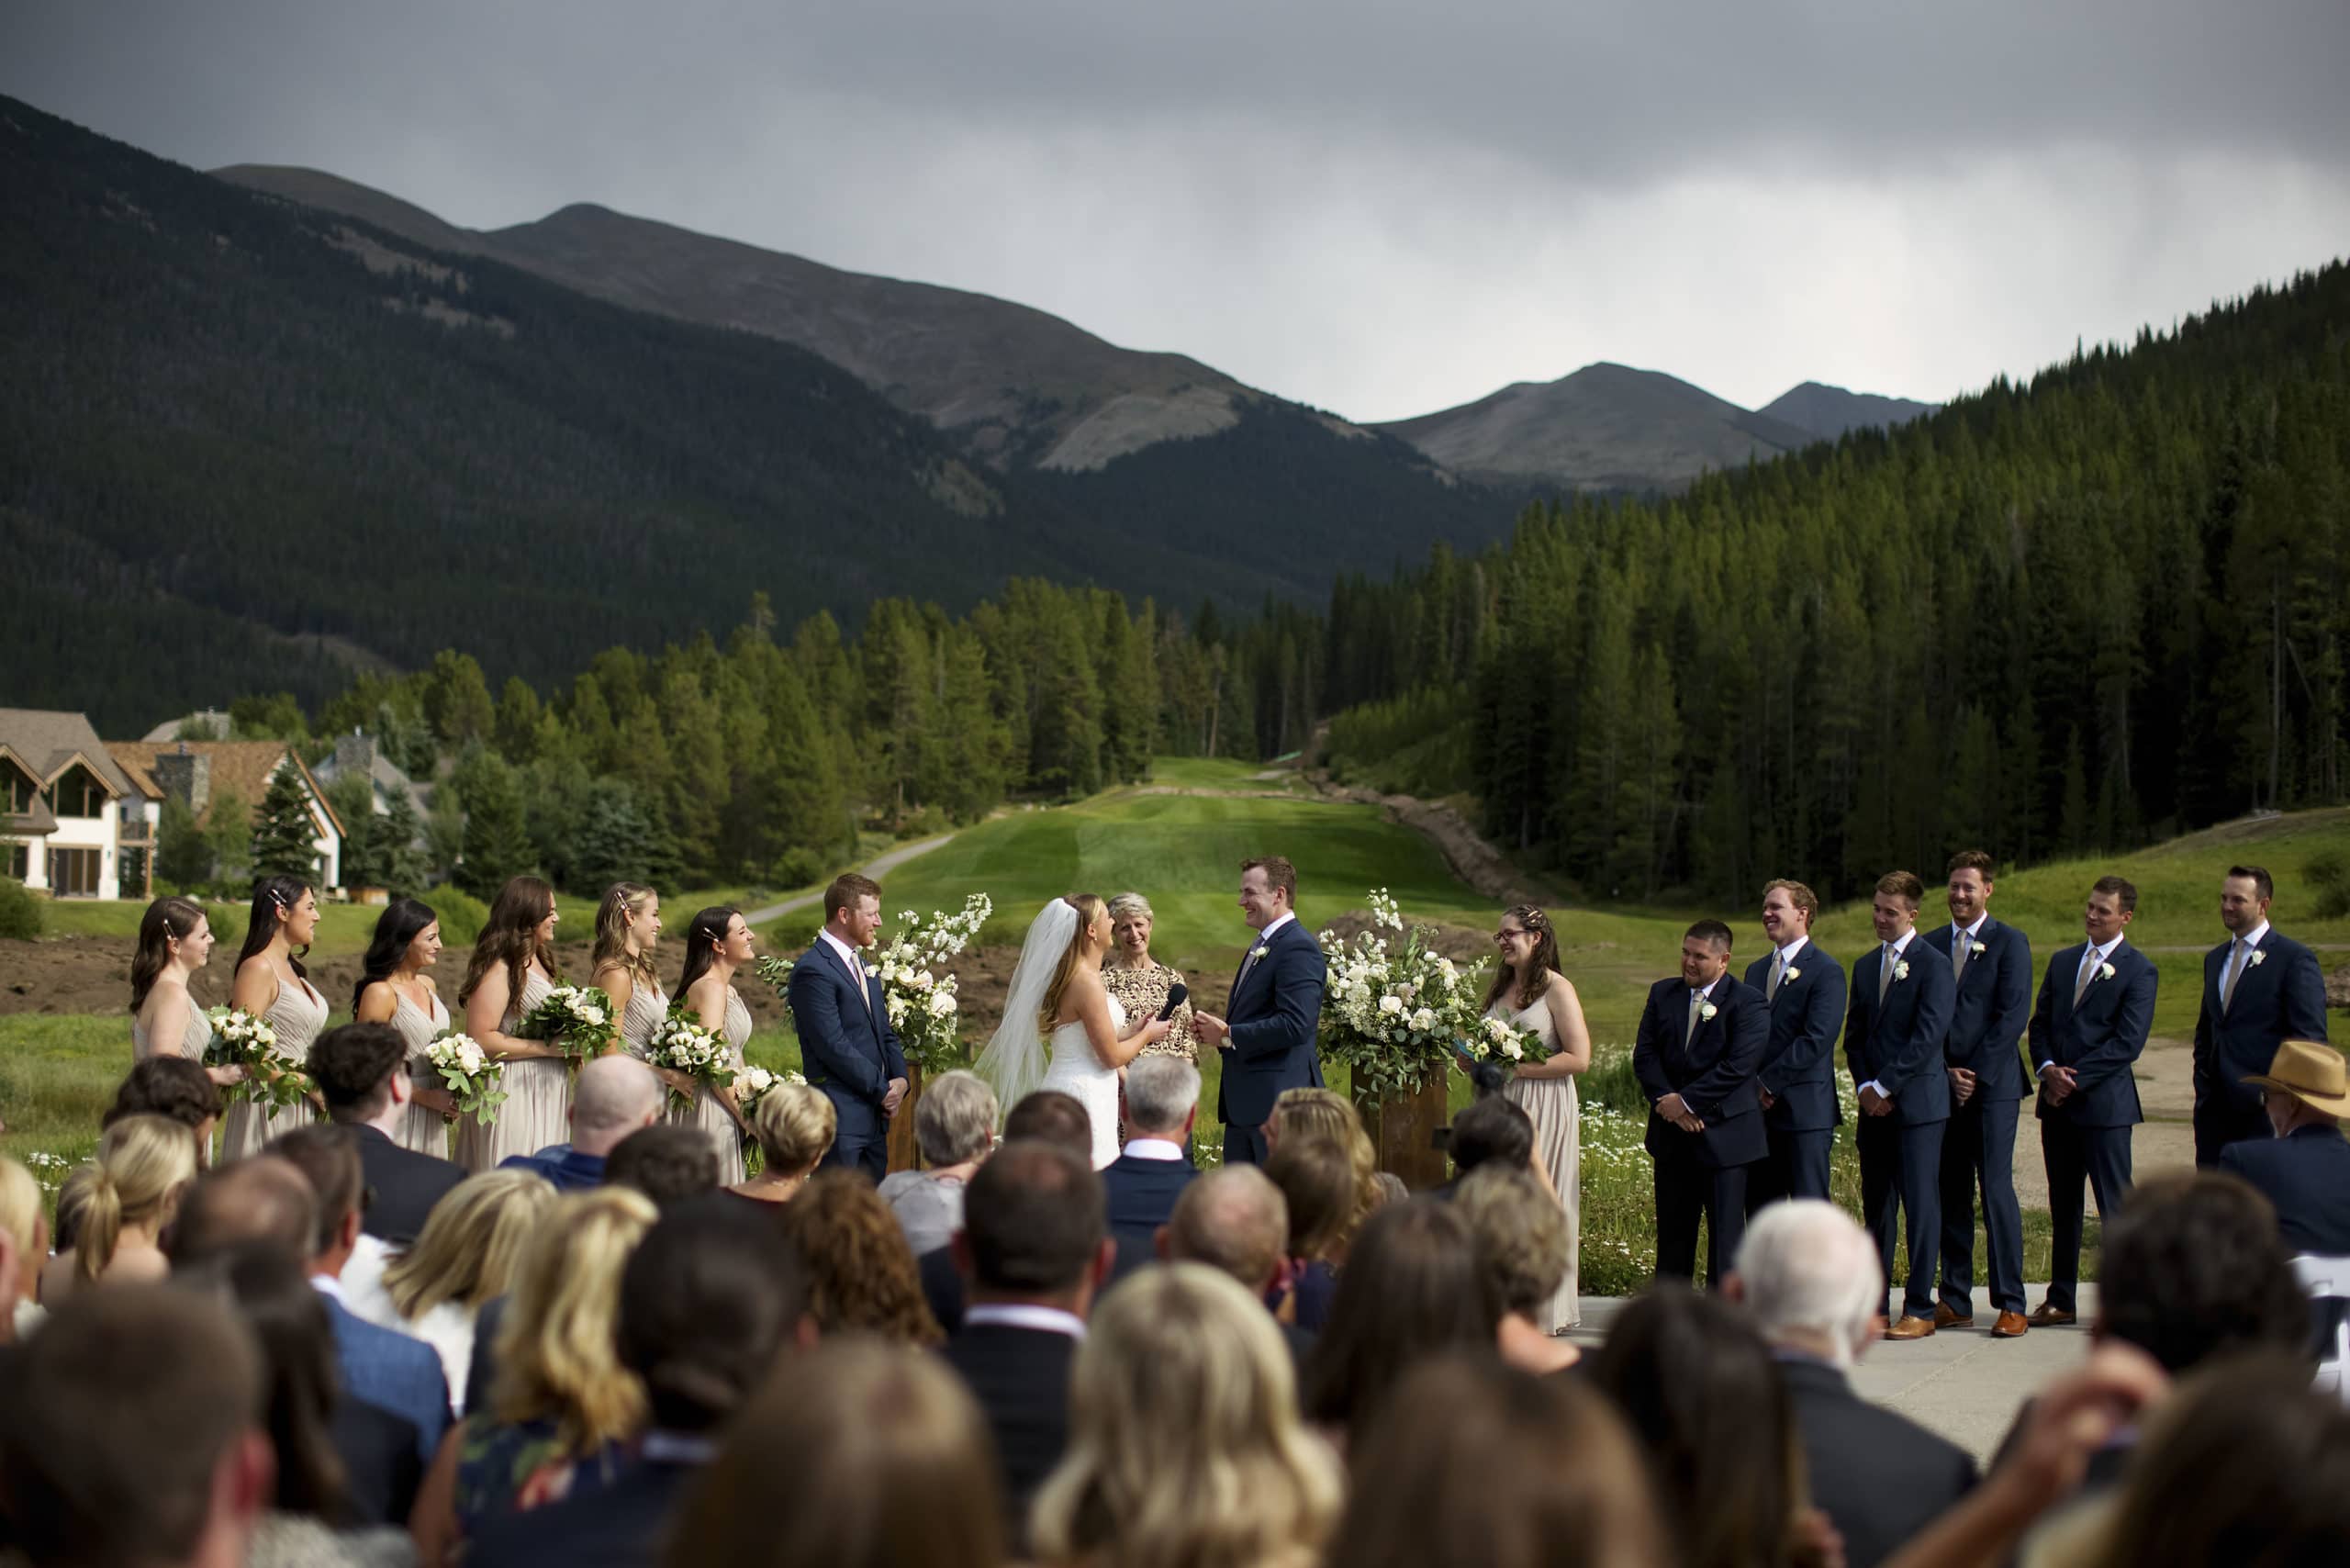 A view of the Mel and Drew’s wedding ceremony on the Copper VIsta pad at Copper Mountain